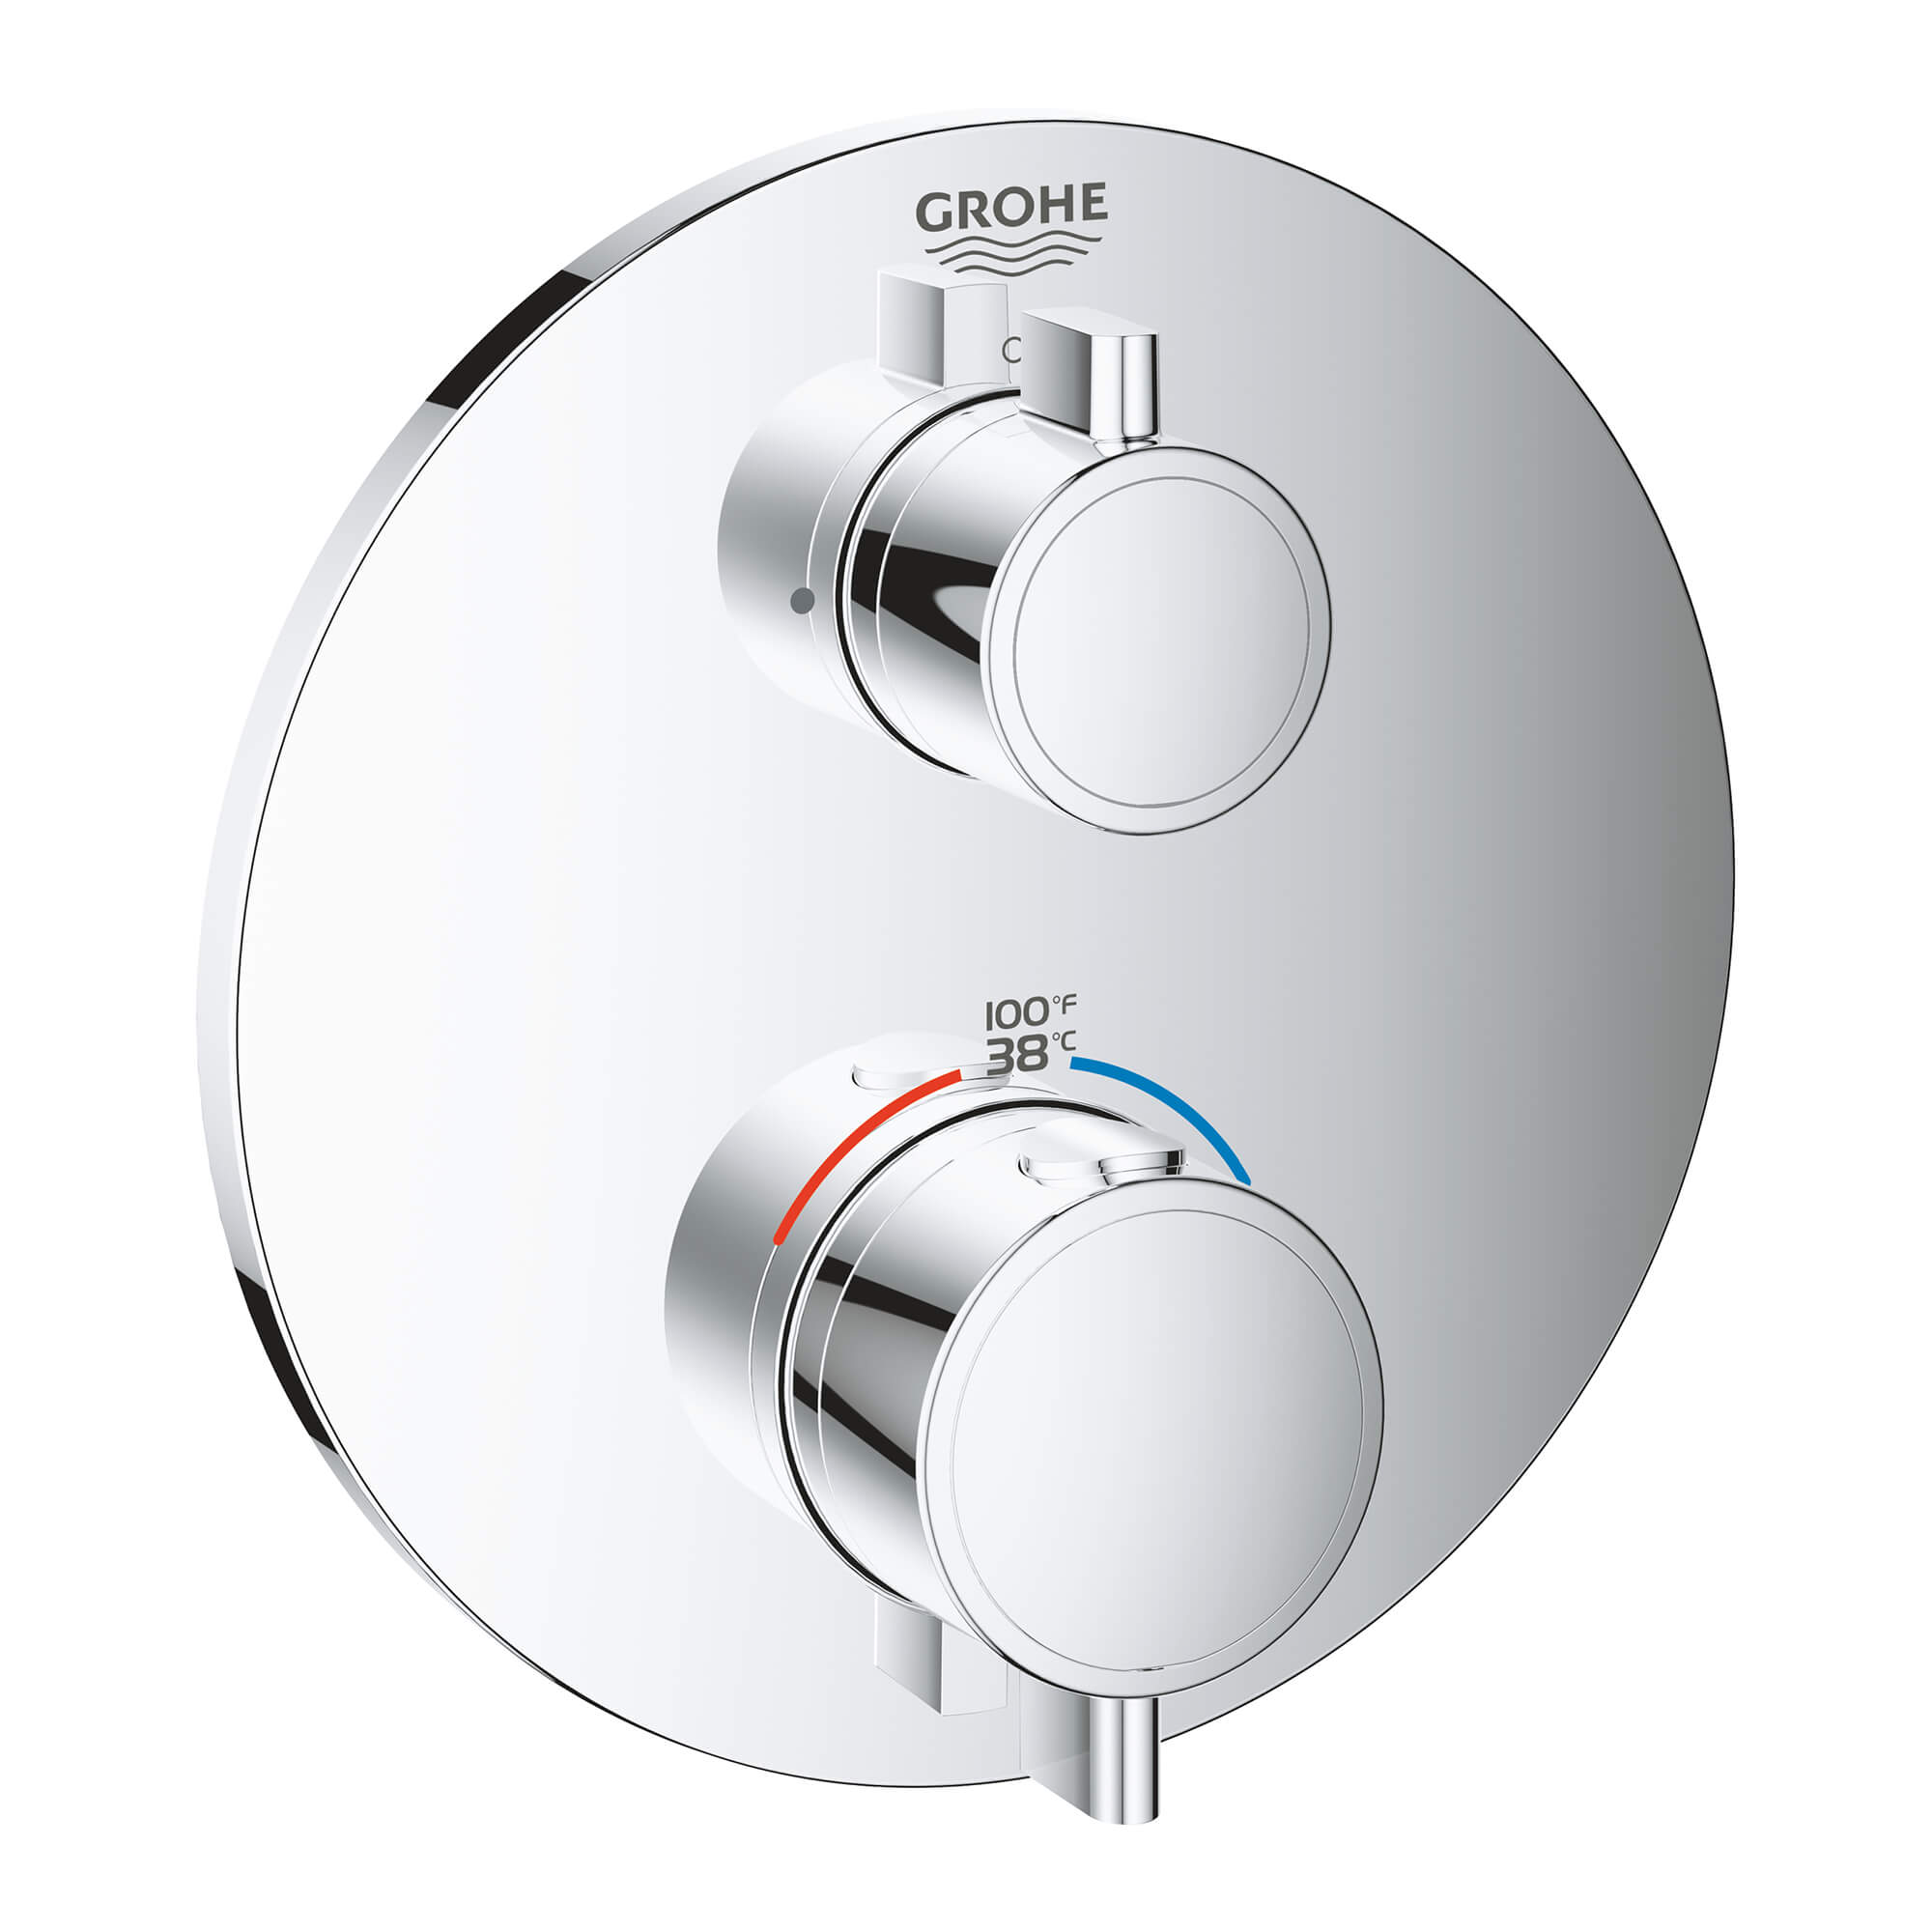 GROHE Grohe 412208EN3 Euphoria thermostatic control Valve with SafeStop Brushed Nickel 